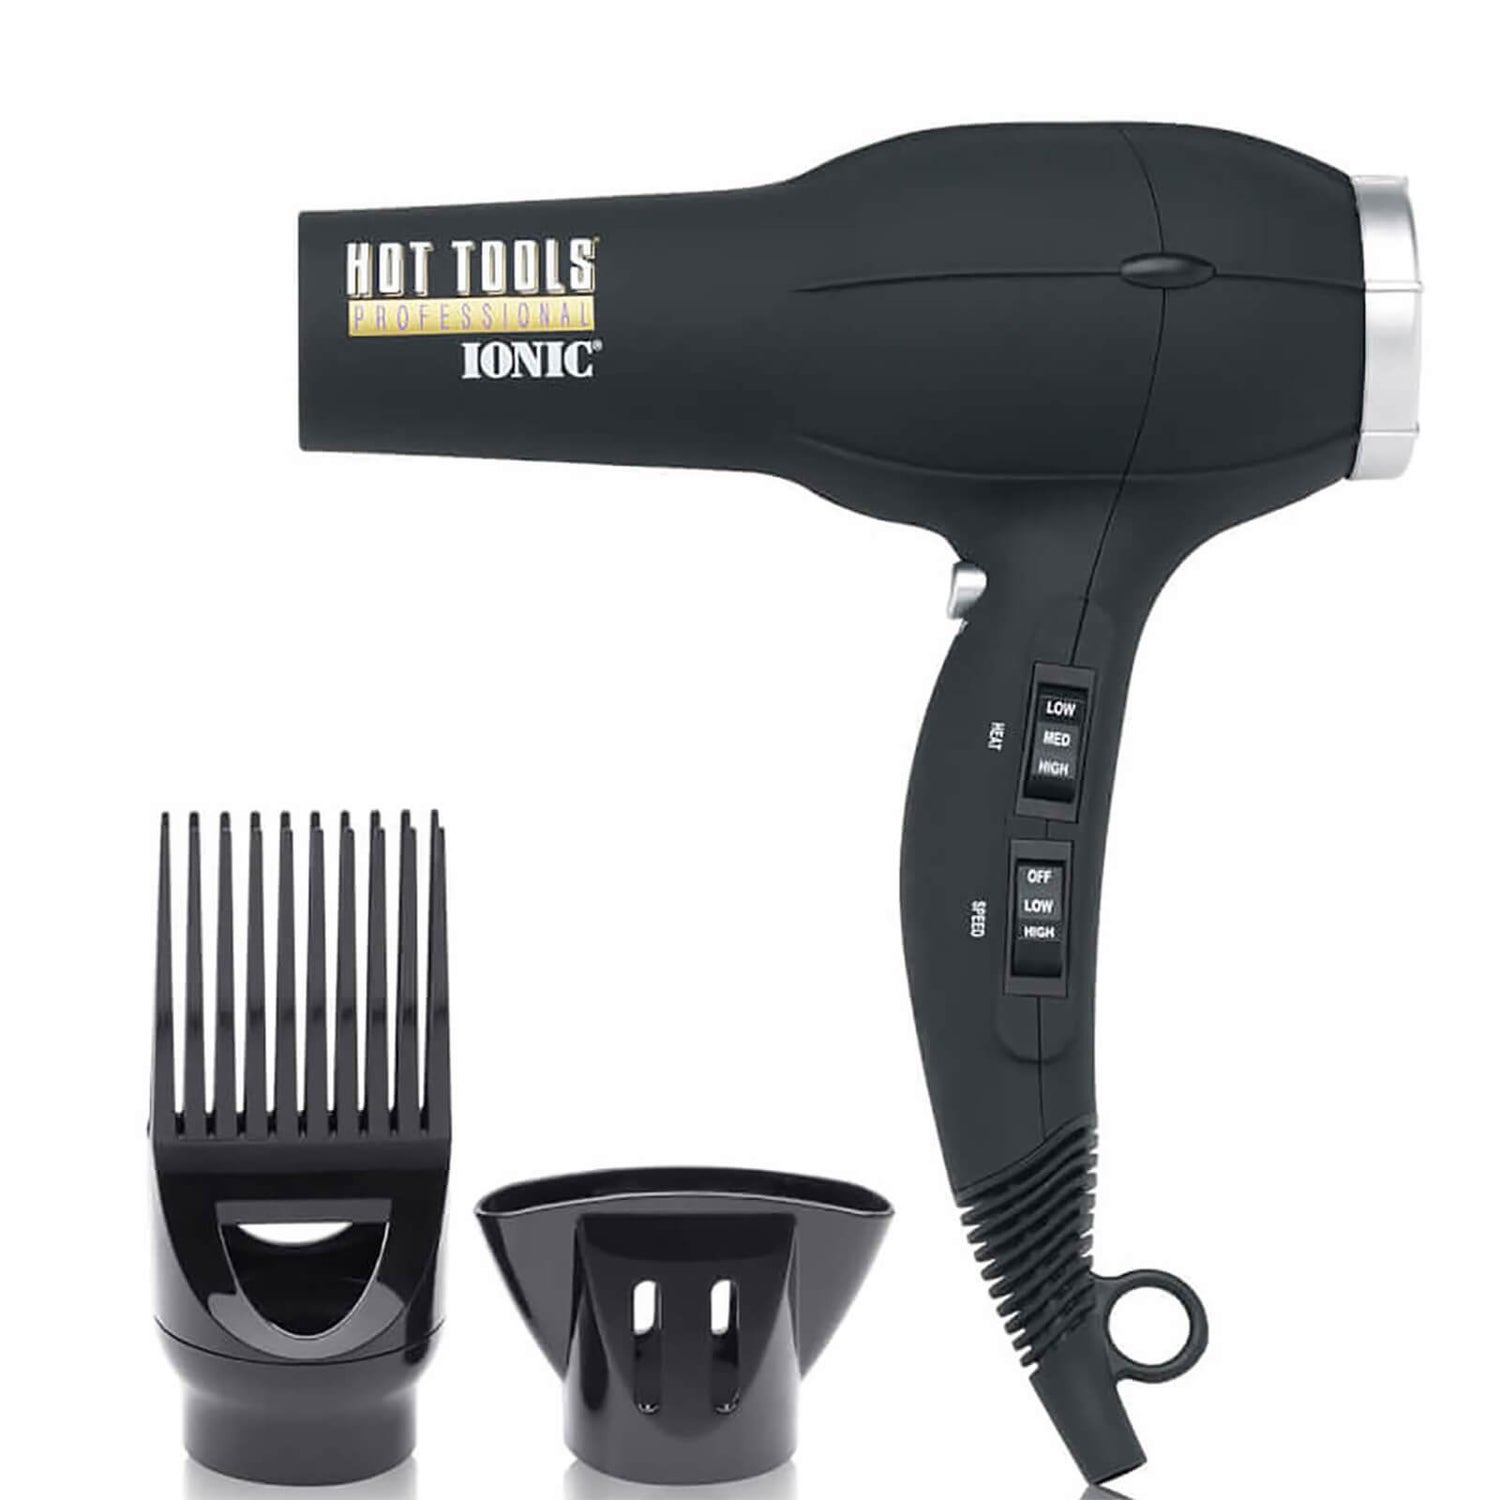 25 Best Hair Dryers For At-Home Blowouts - New Blow Dryers for 2023